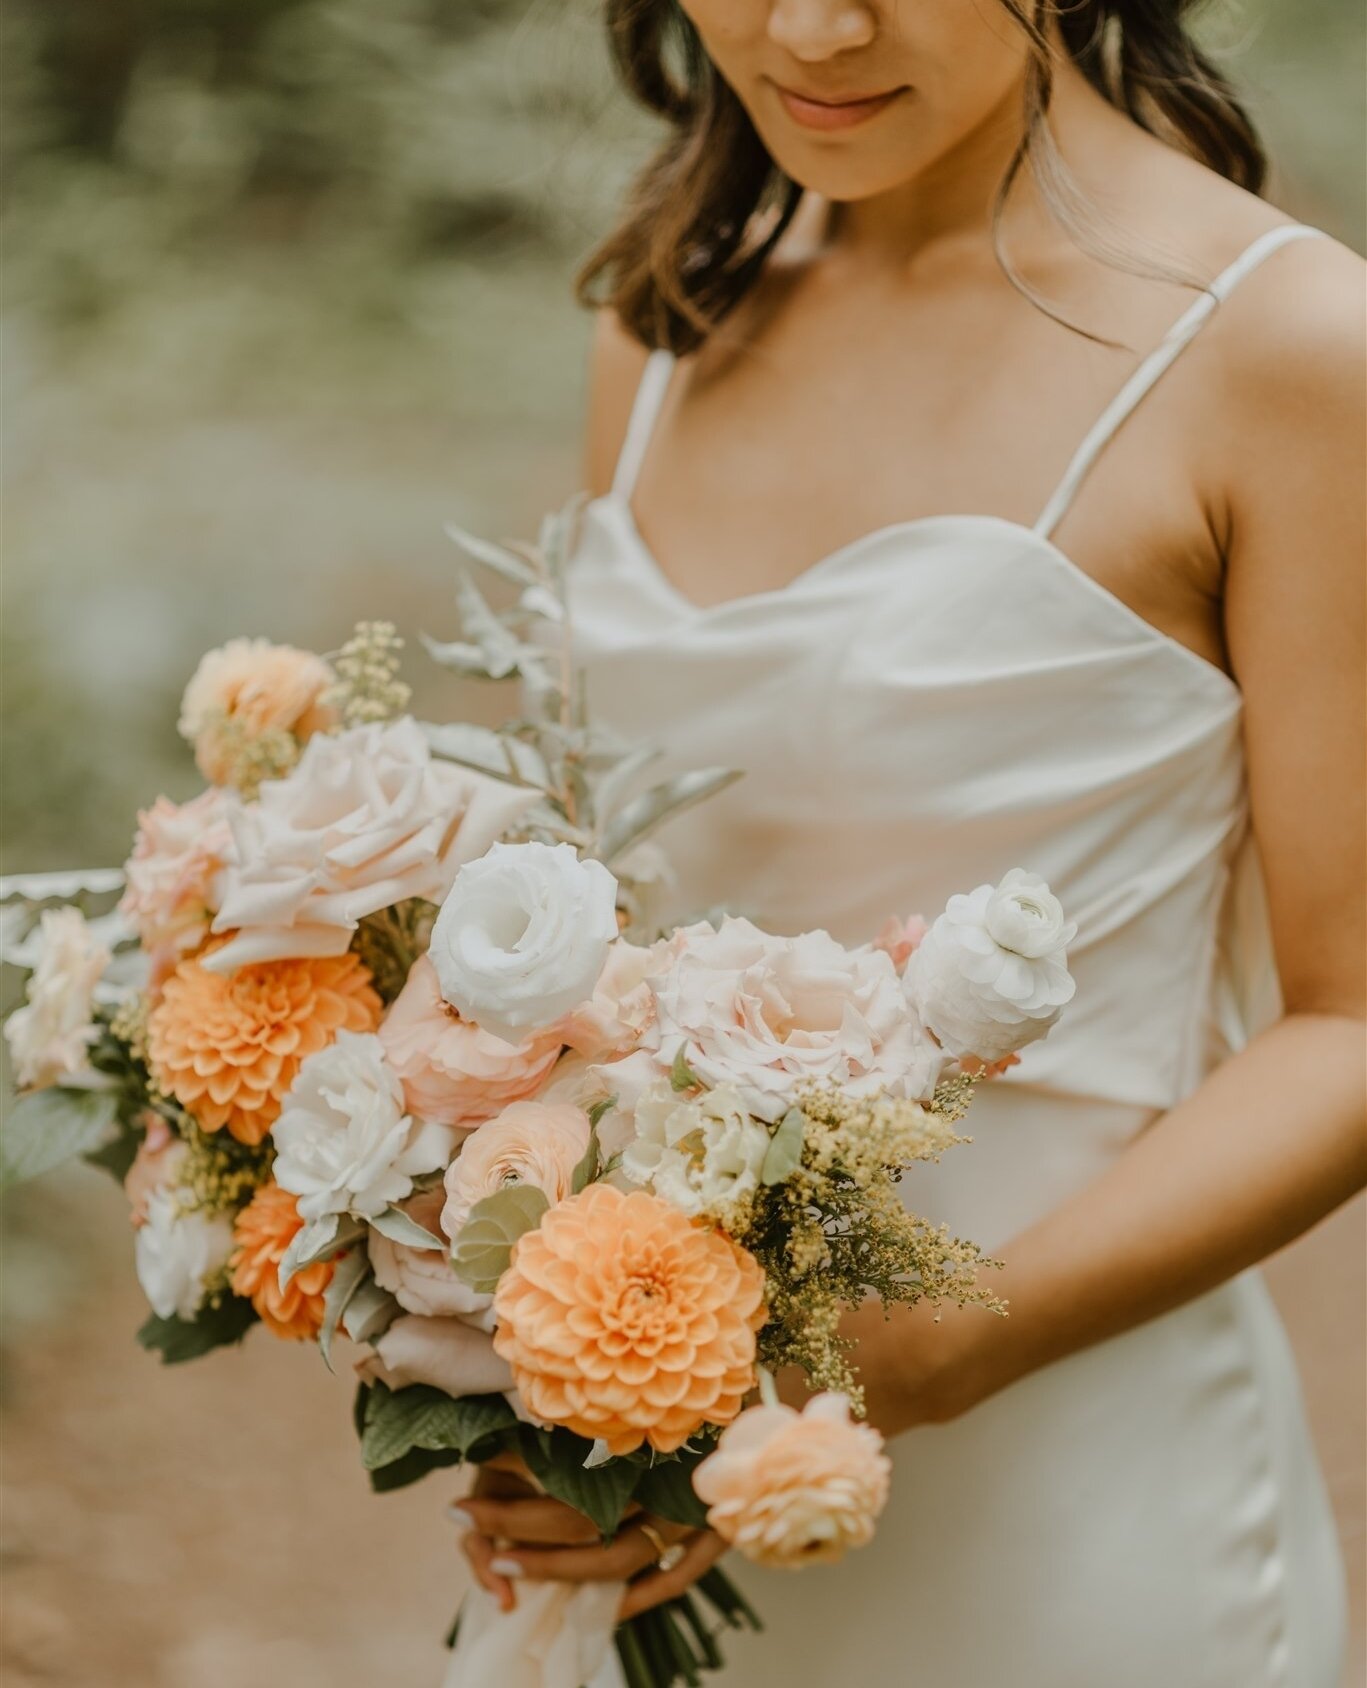 Stacy &amp; Elliott's Summer wedding florals were one of my inspirations for my own wedding colour scheme. The pops of orange were perfect for this summer wedding. ⁠
⁠
You can now find this featured wedding on @eventsource.ca ⁠
⁠
Click the link in ou